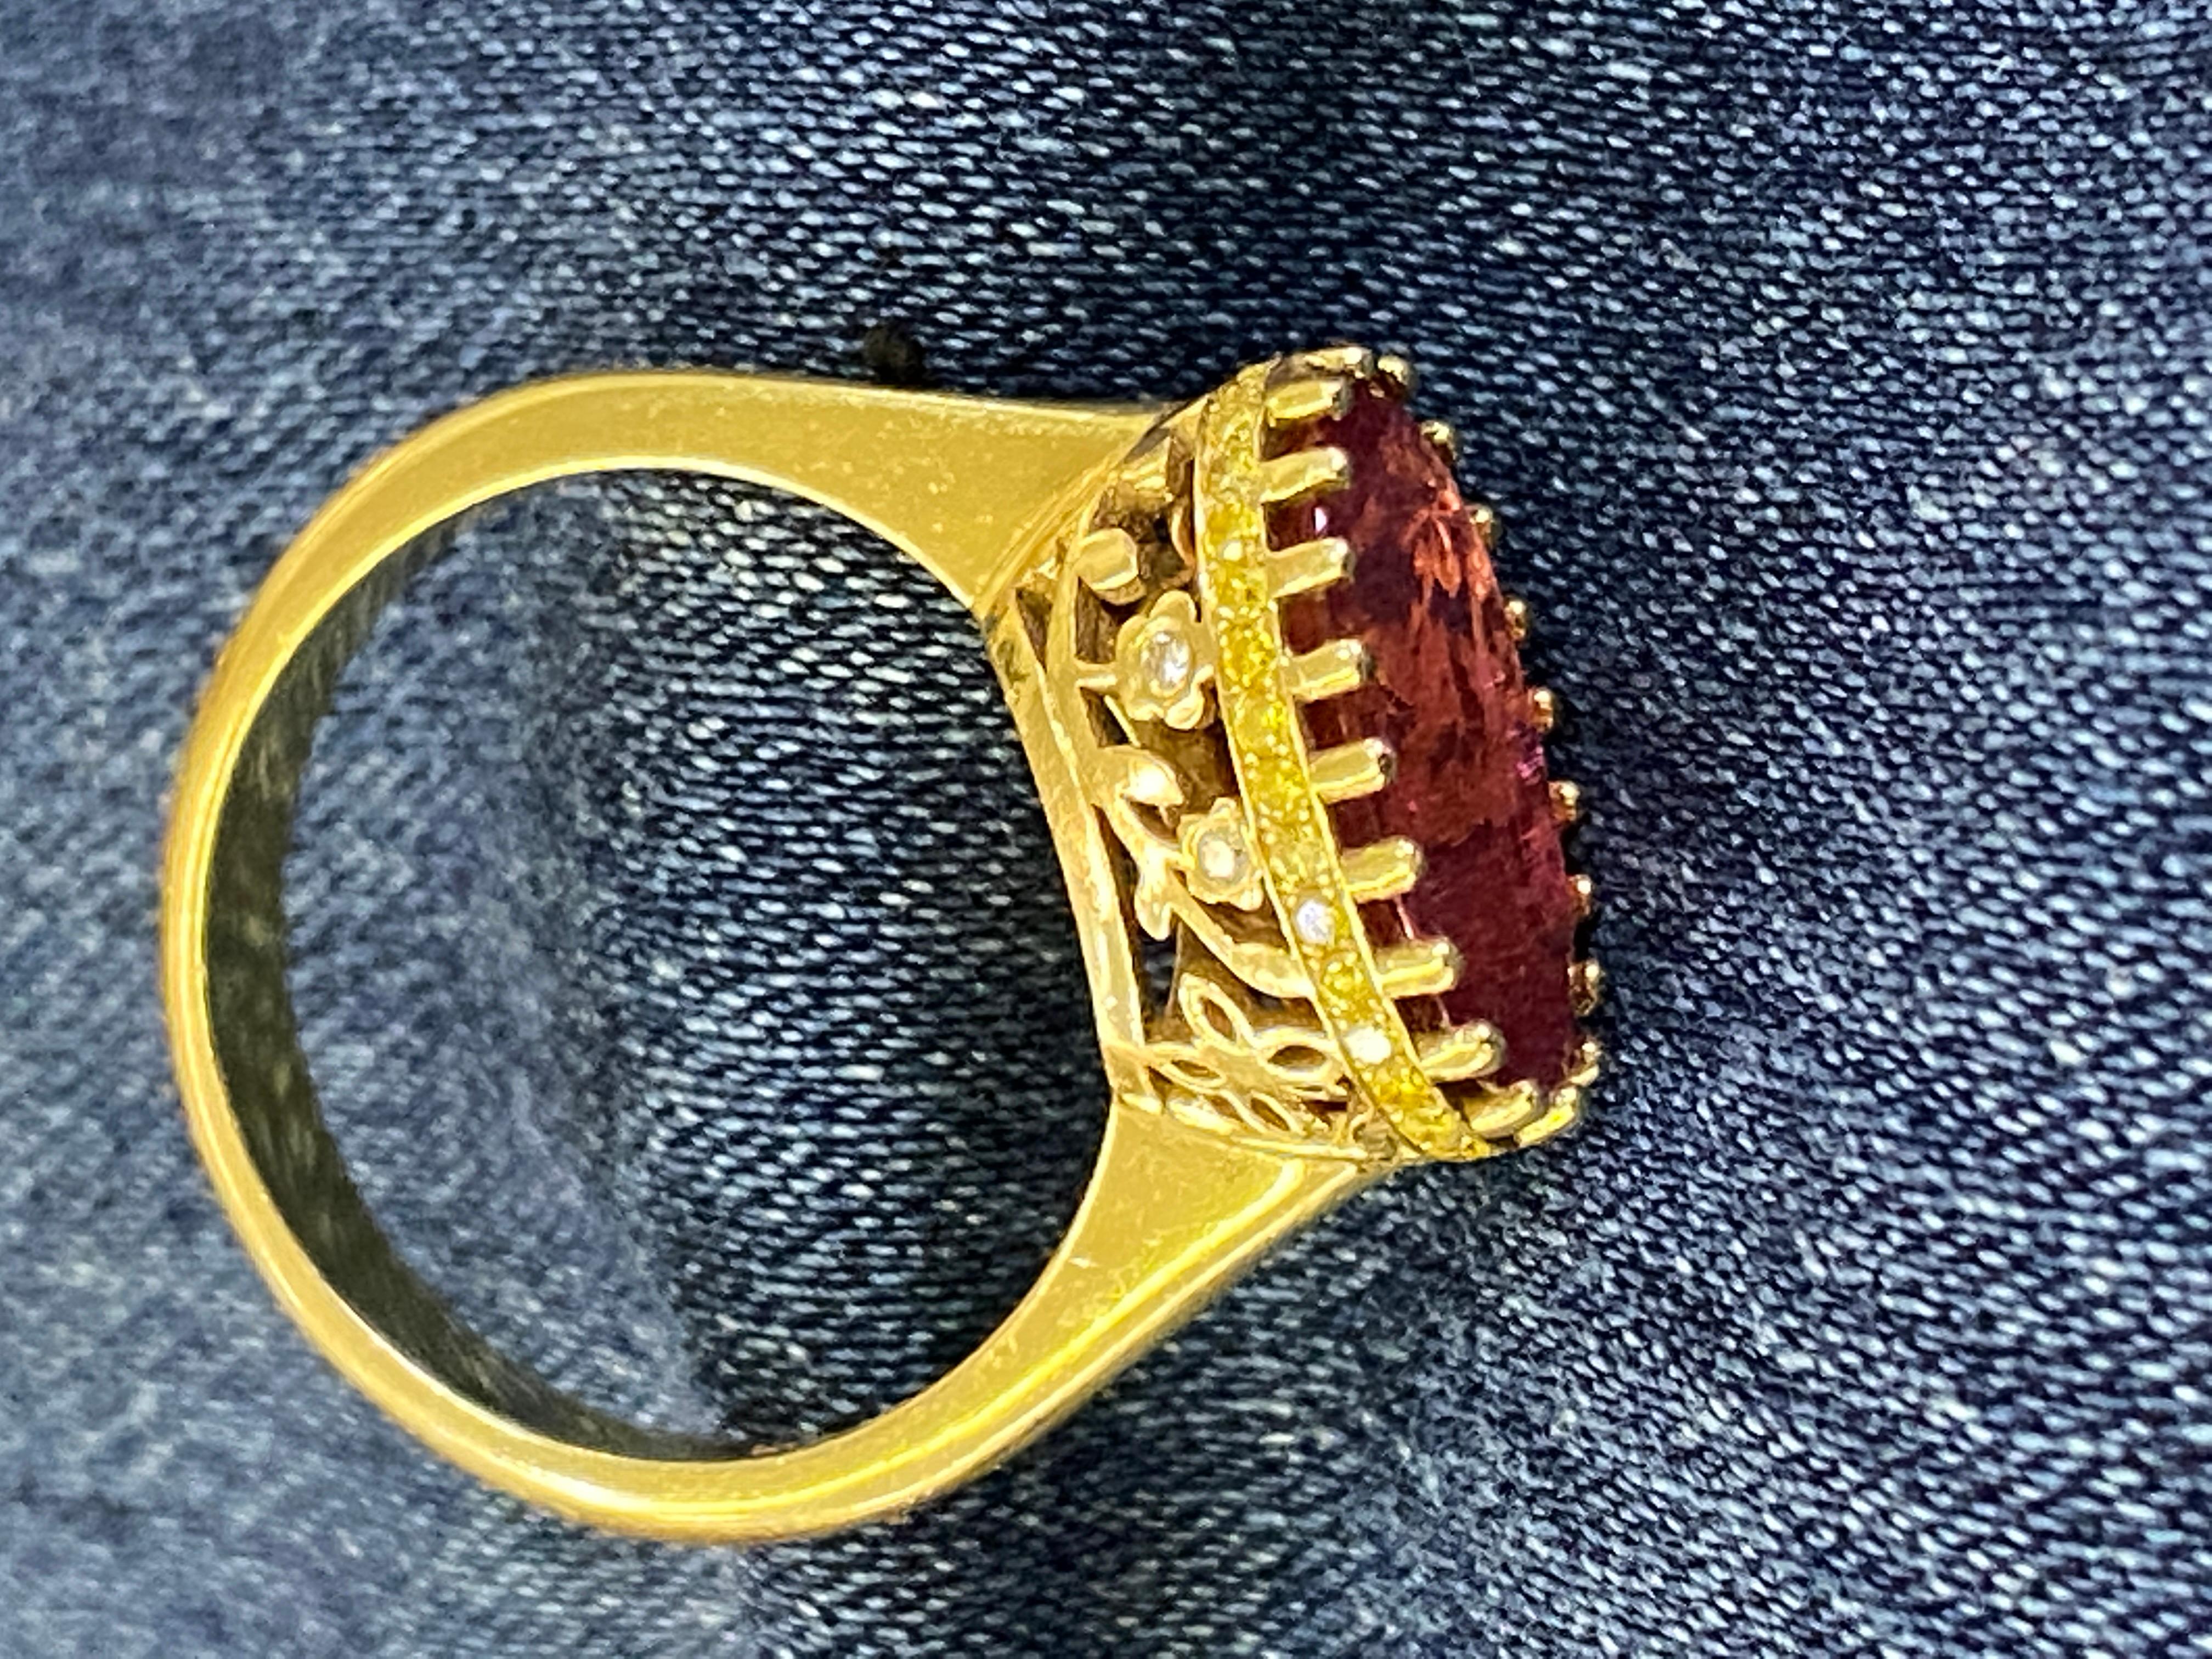 18k yellow gold ring with oval ruby-pink tourmaline and yellow diamonds. Size 7.25